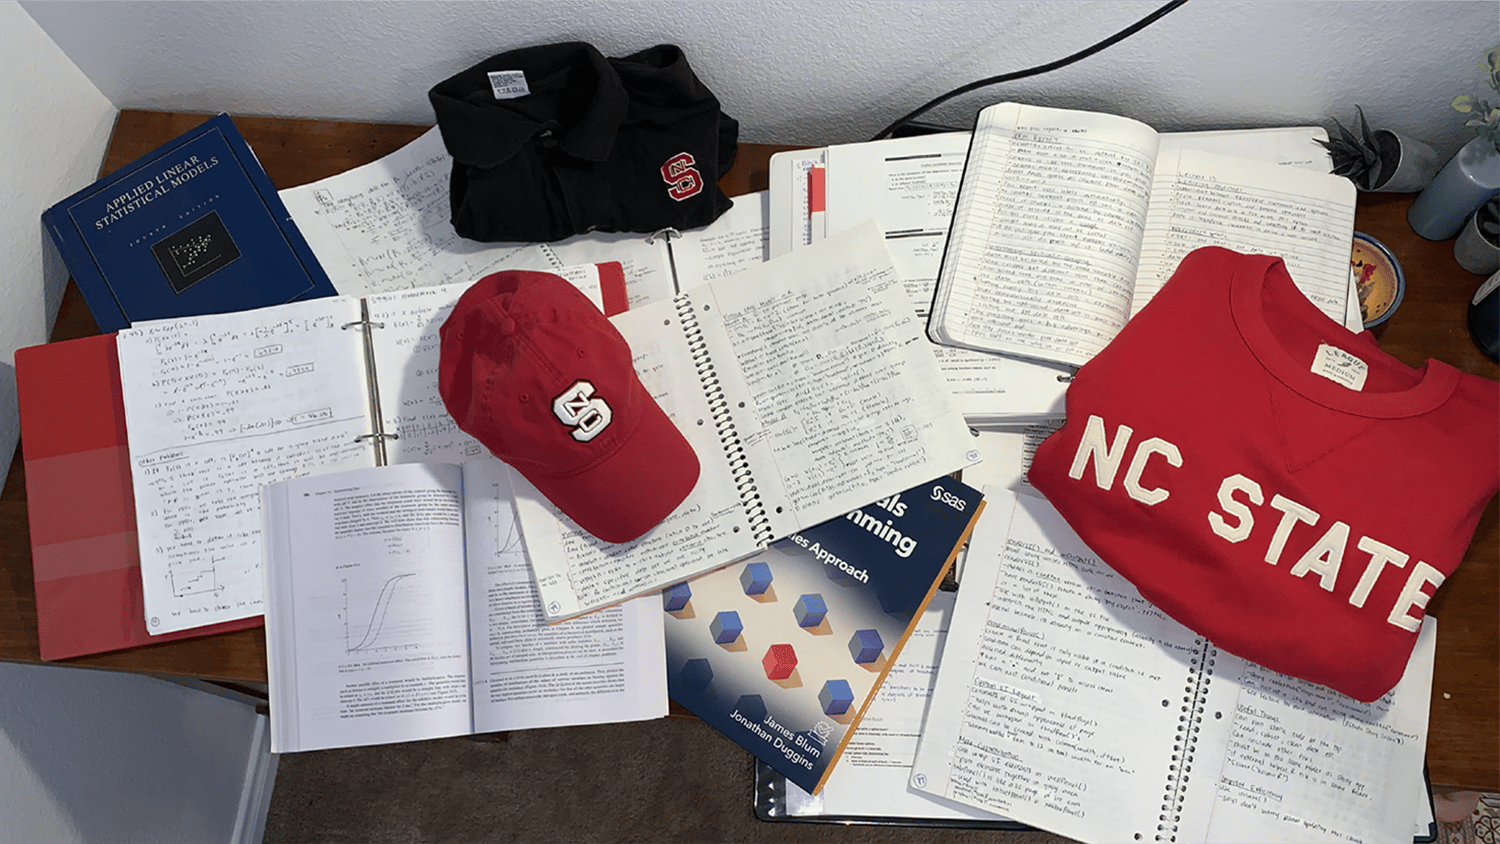 An NC State ballcap and t-shirts lie on top of scattered notebooks.